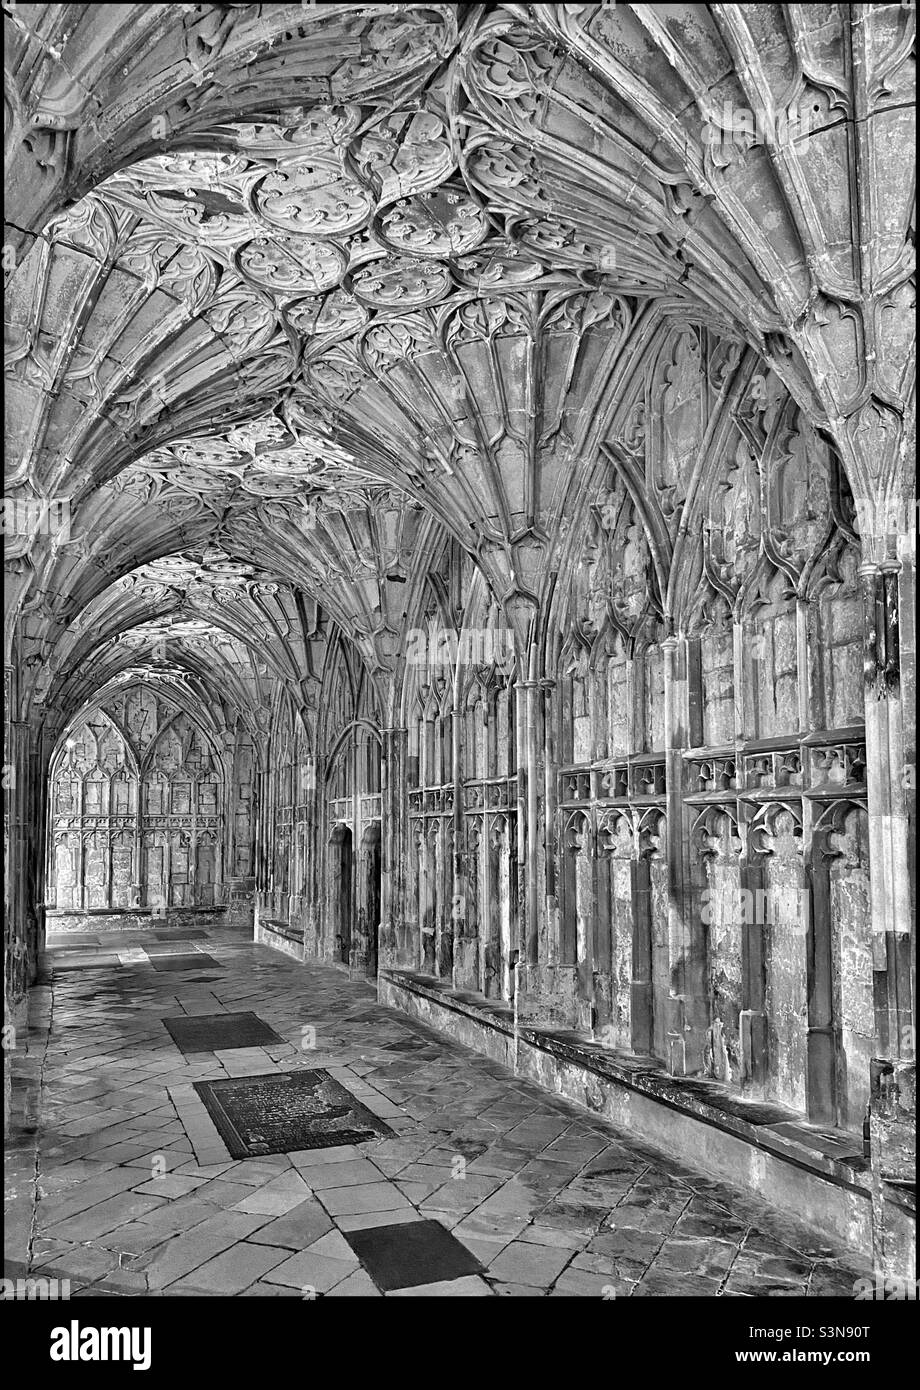 The famous cloisters area of Gloucester Cathedral in Gloucestershire, England. The impressive fan vaulted ceiling area was used in 3 of the Harry Potter films inc. The Philosopher’s Stone.  Photo©️ CH Stock Photo